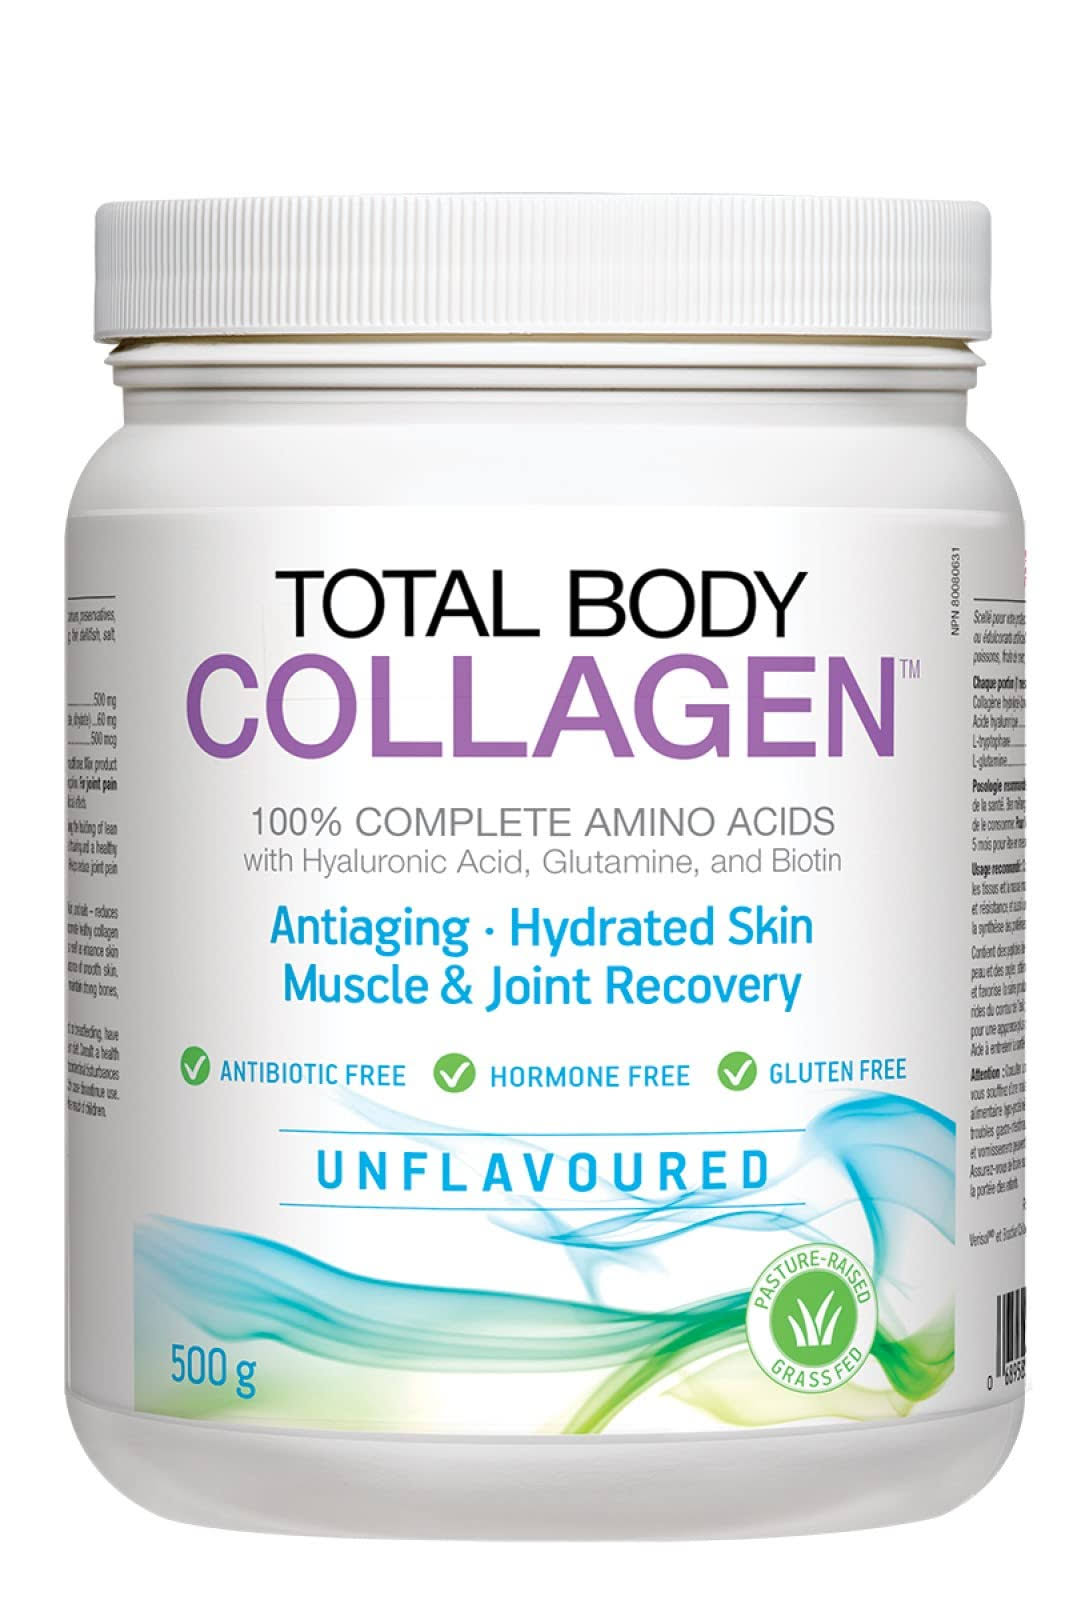 Natural Factors Unflavored Total Body Collagen - 500 G